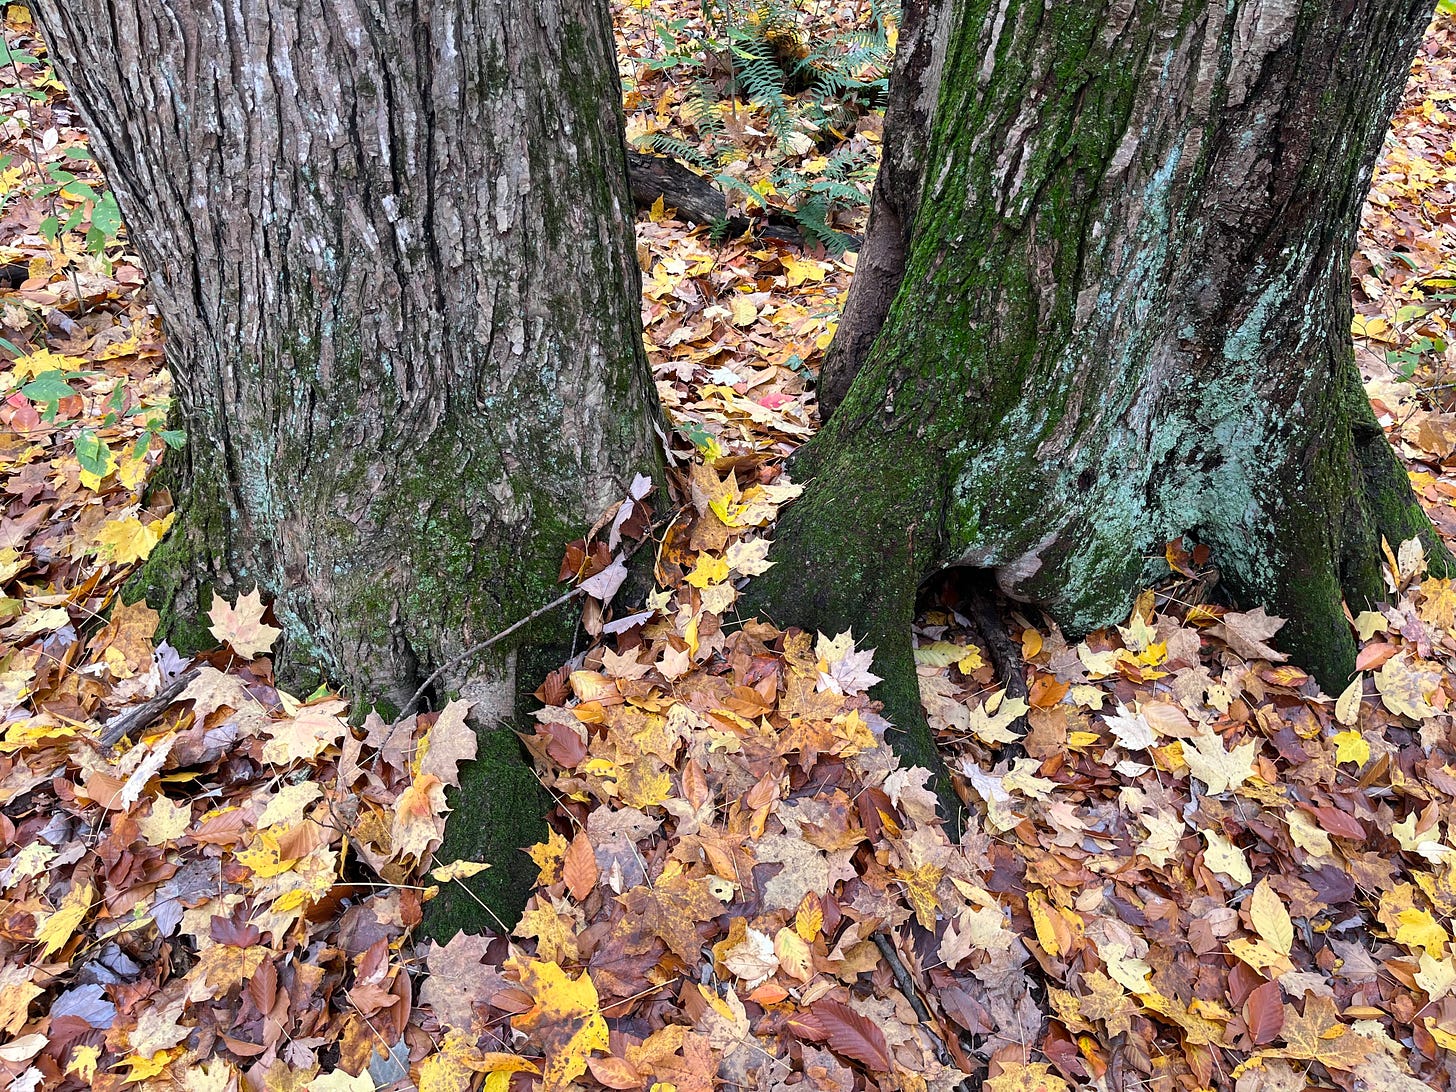 A photo of two large maple trunks surrounded by dead leaves.